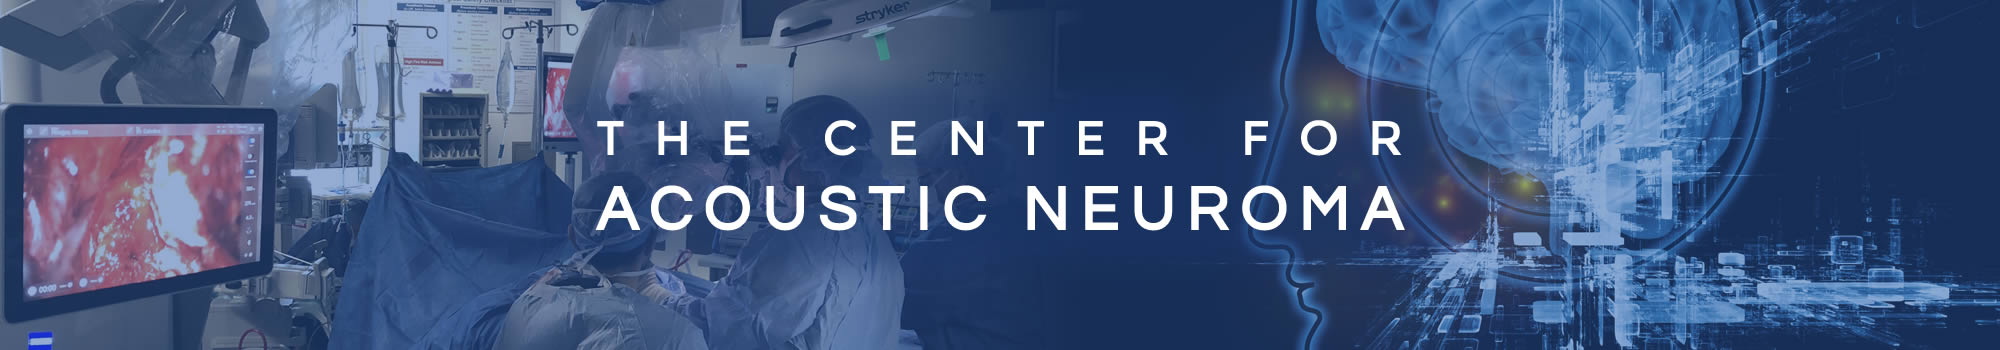 The Center for Acoustic Neuroma Dallas, Texas